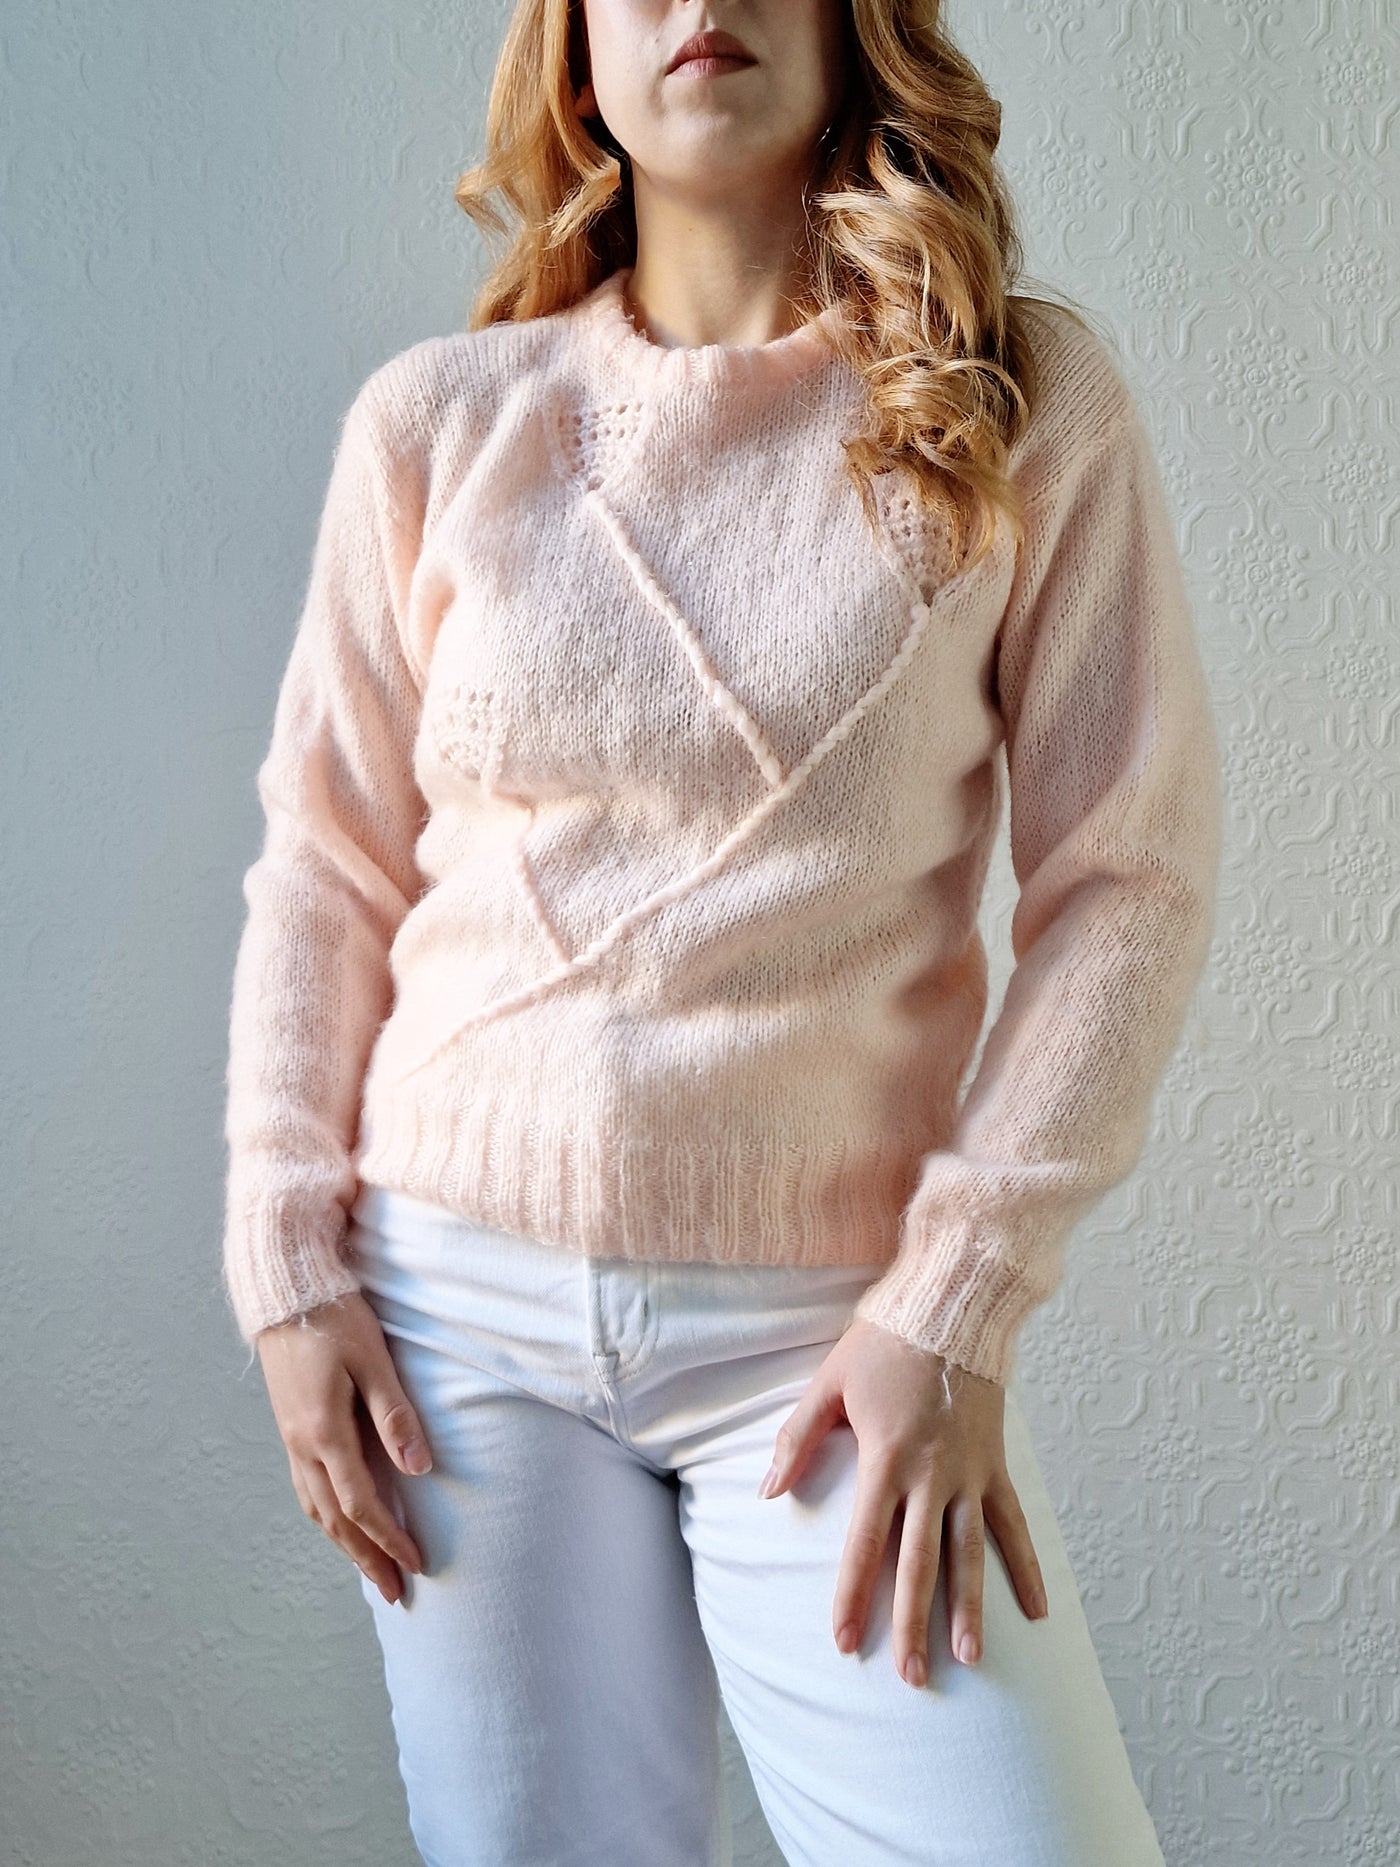 Vintage 80s Handknitted Light Peach Mohair Jumper with Crew Neck - S